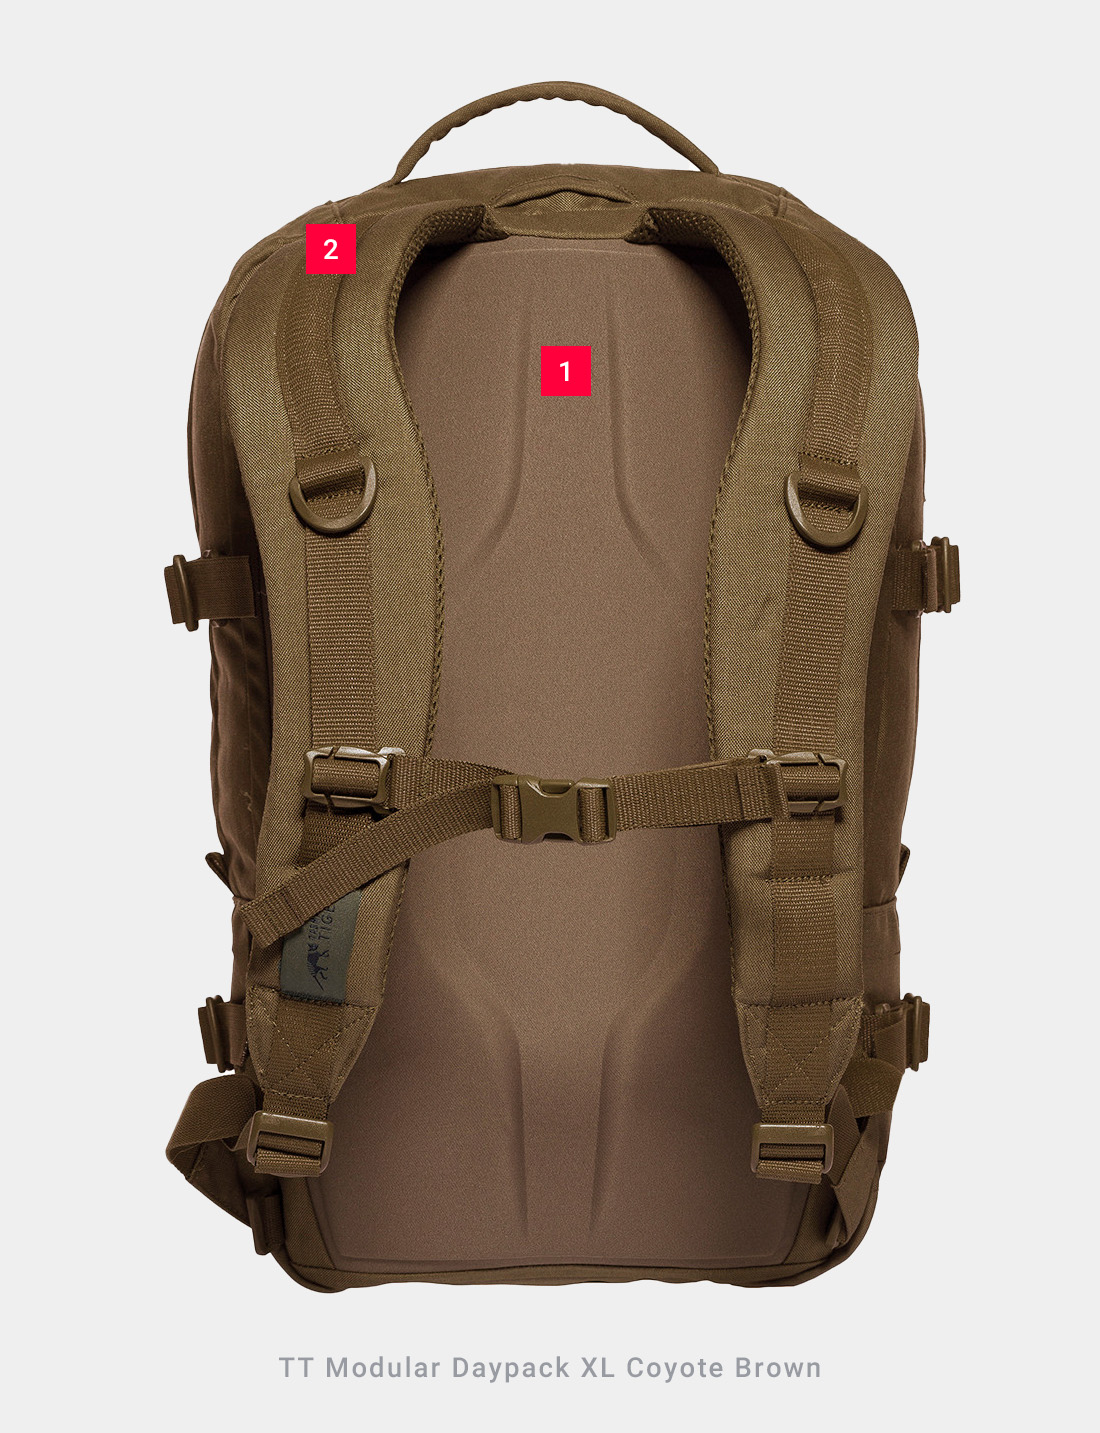 TT Modular Daypack XL Coyote Brown - Thermo Mold-Rückensystem